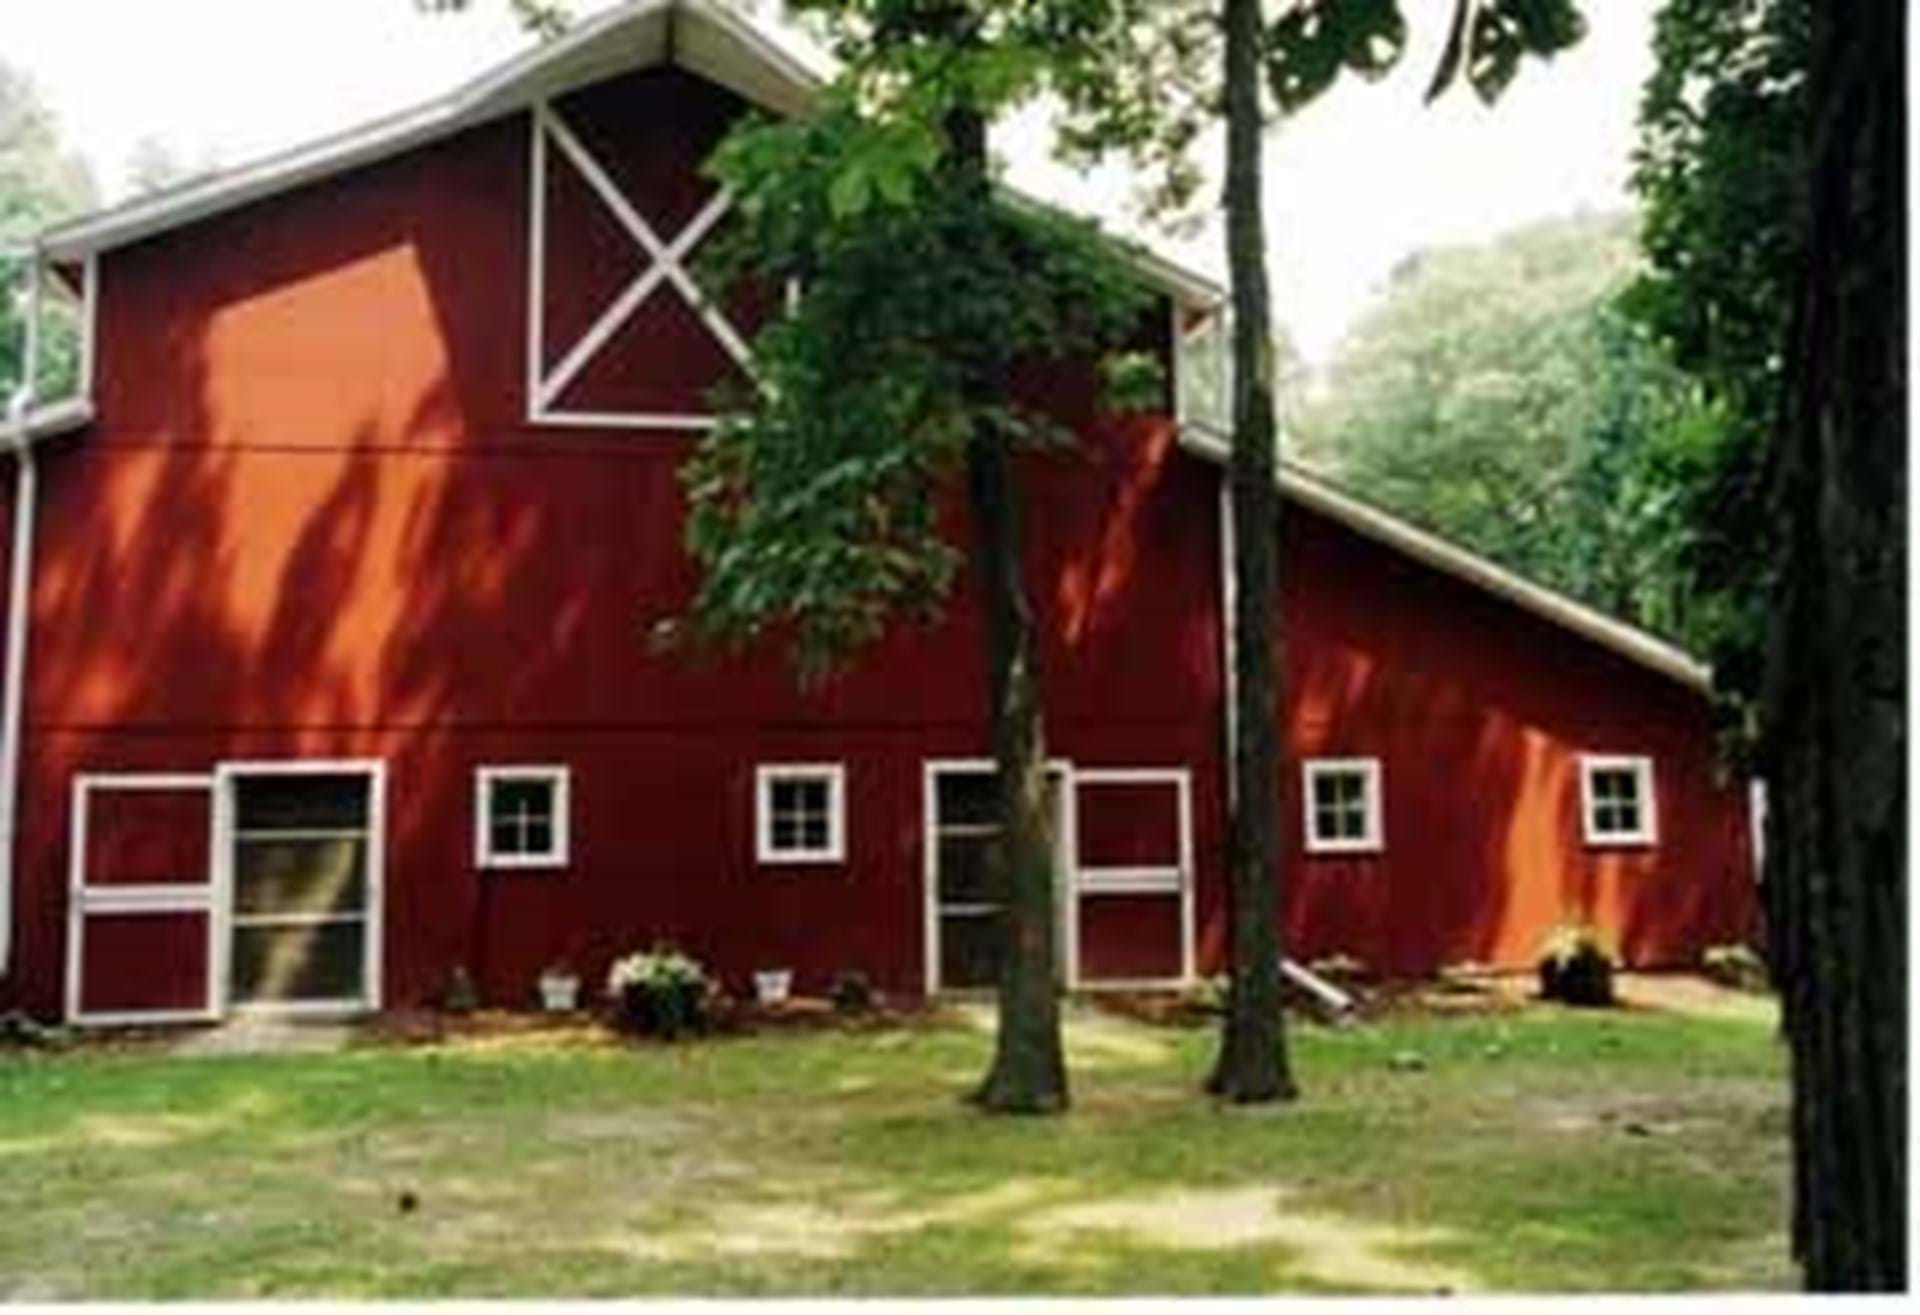 Morris Barn with antique farm implements